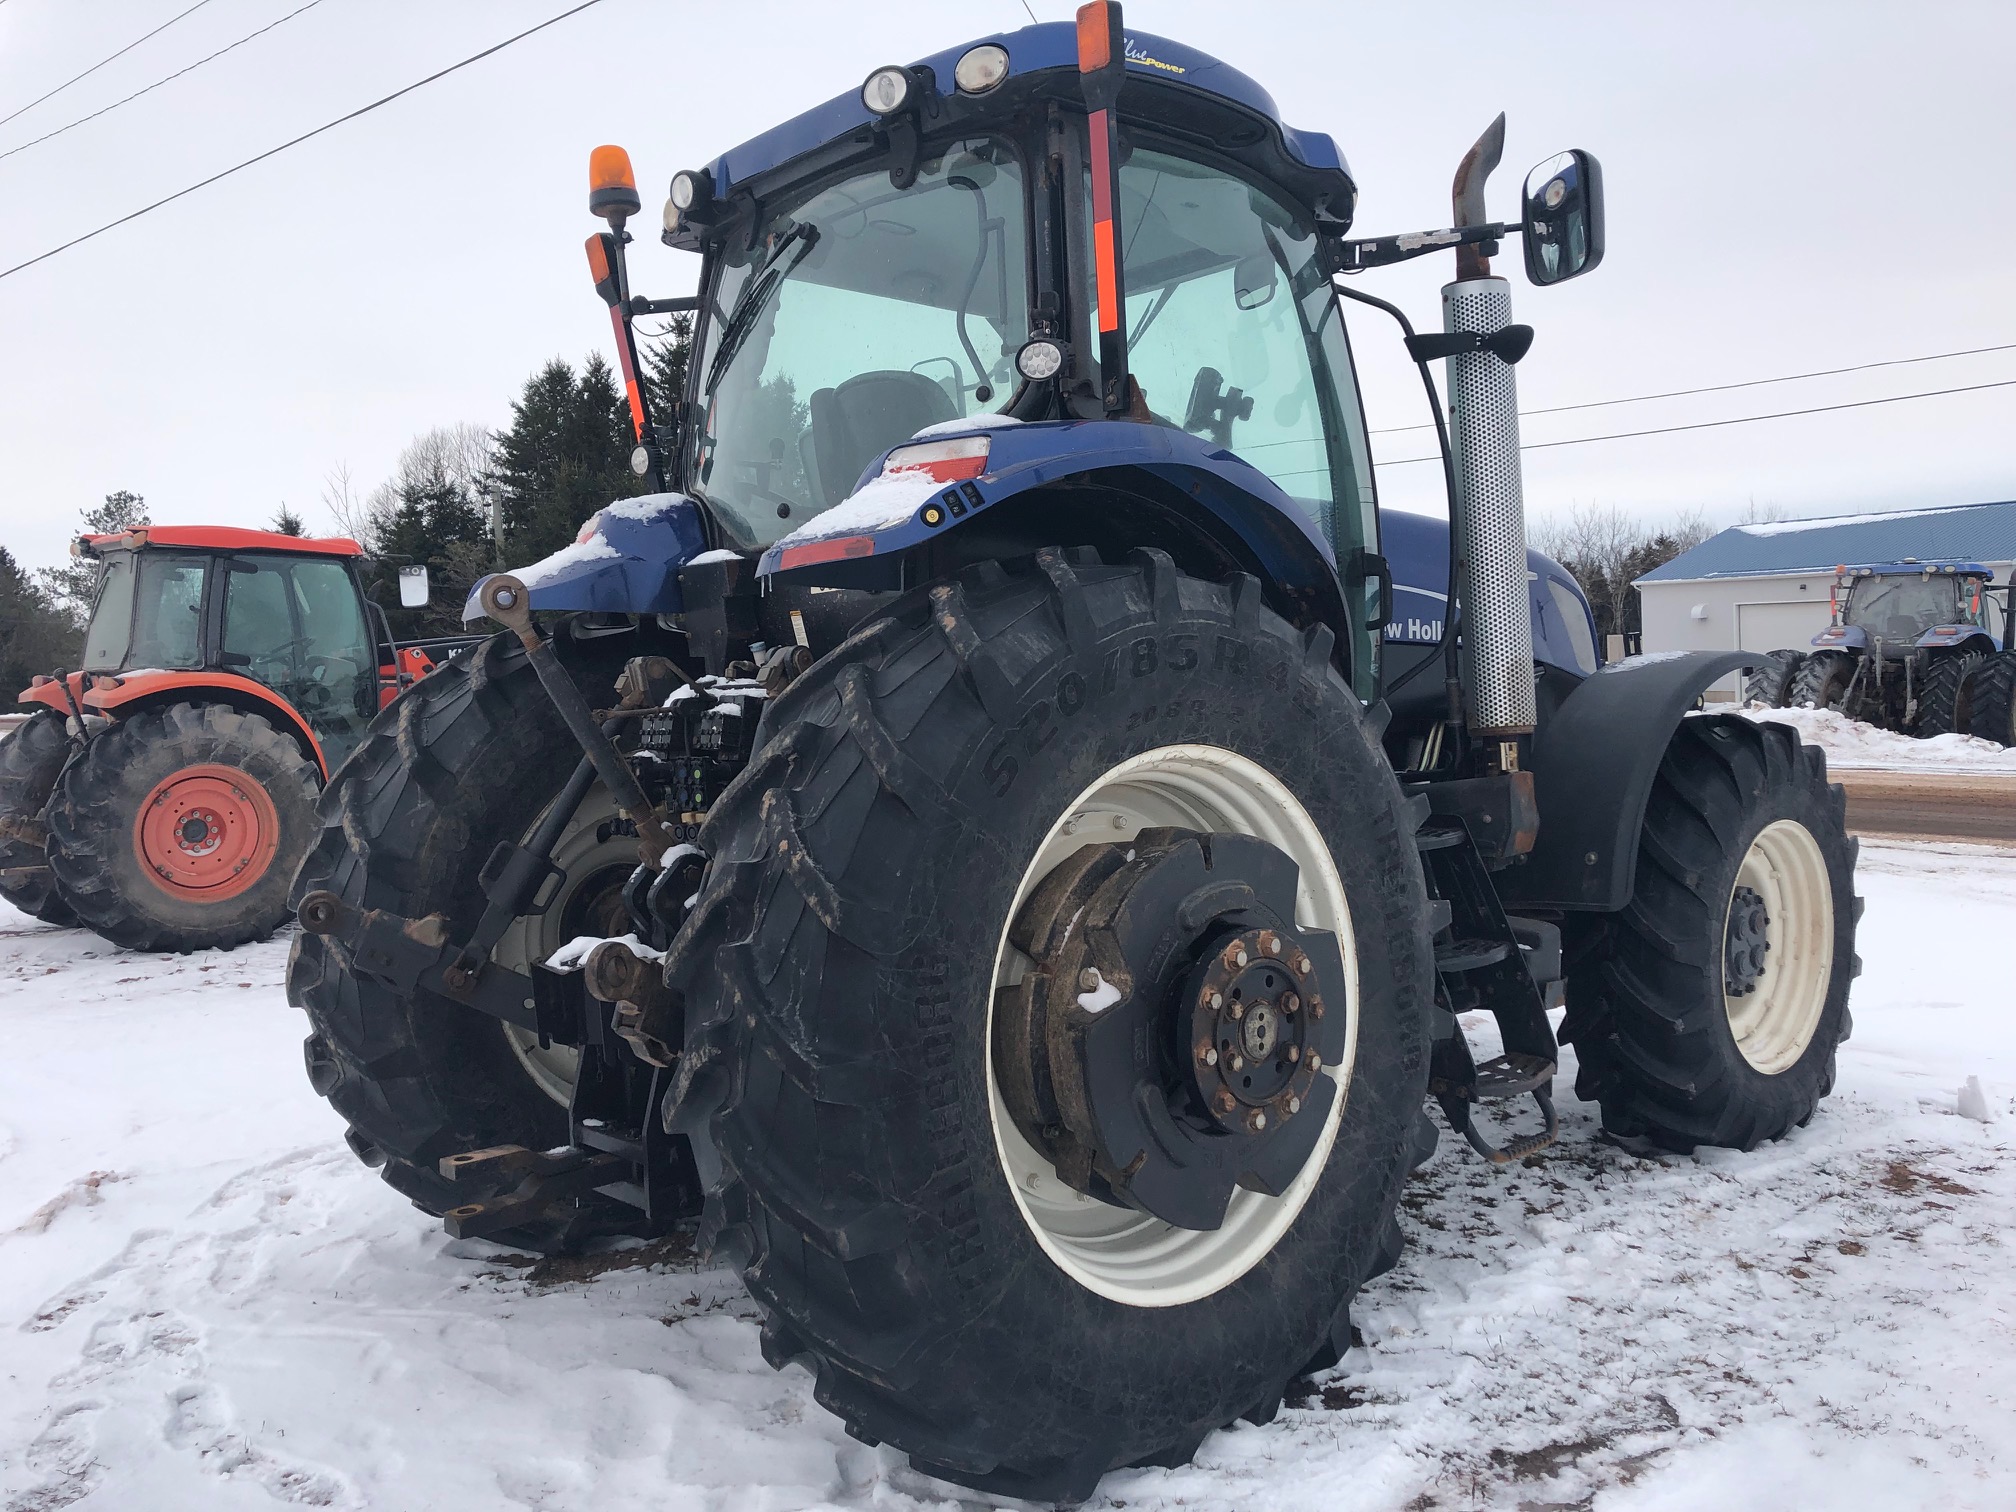 2011 New Holland T7070 Tractor